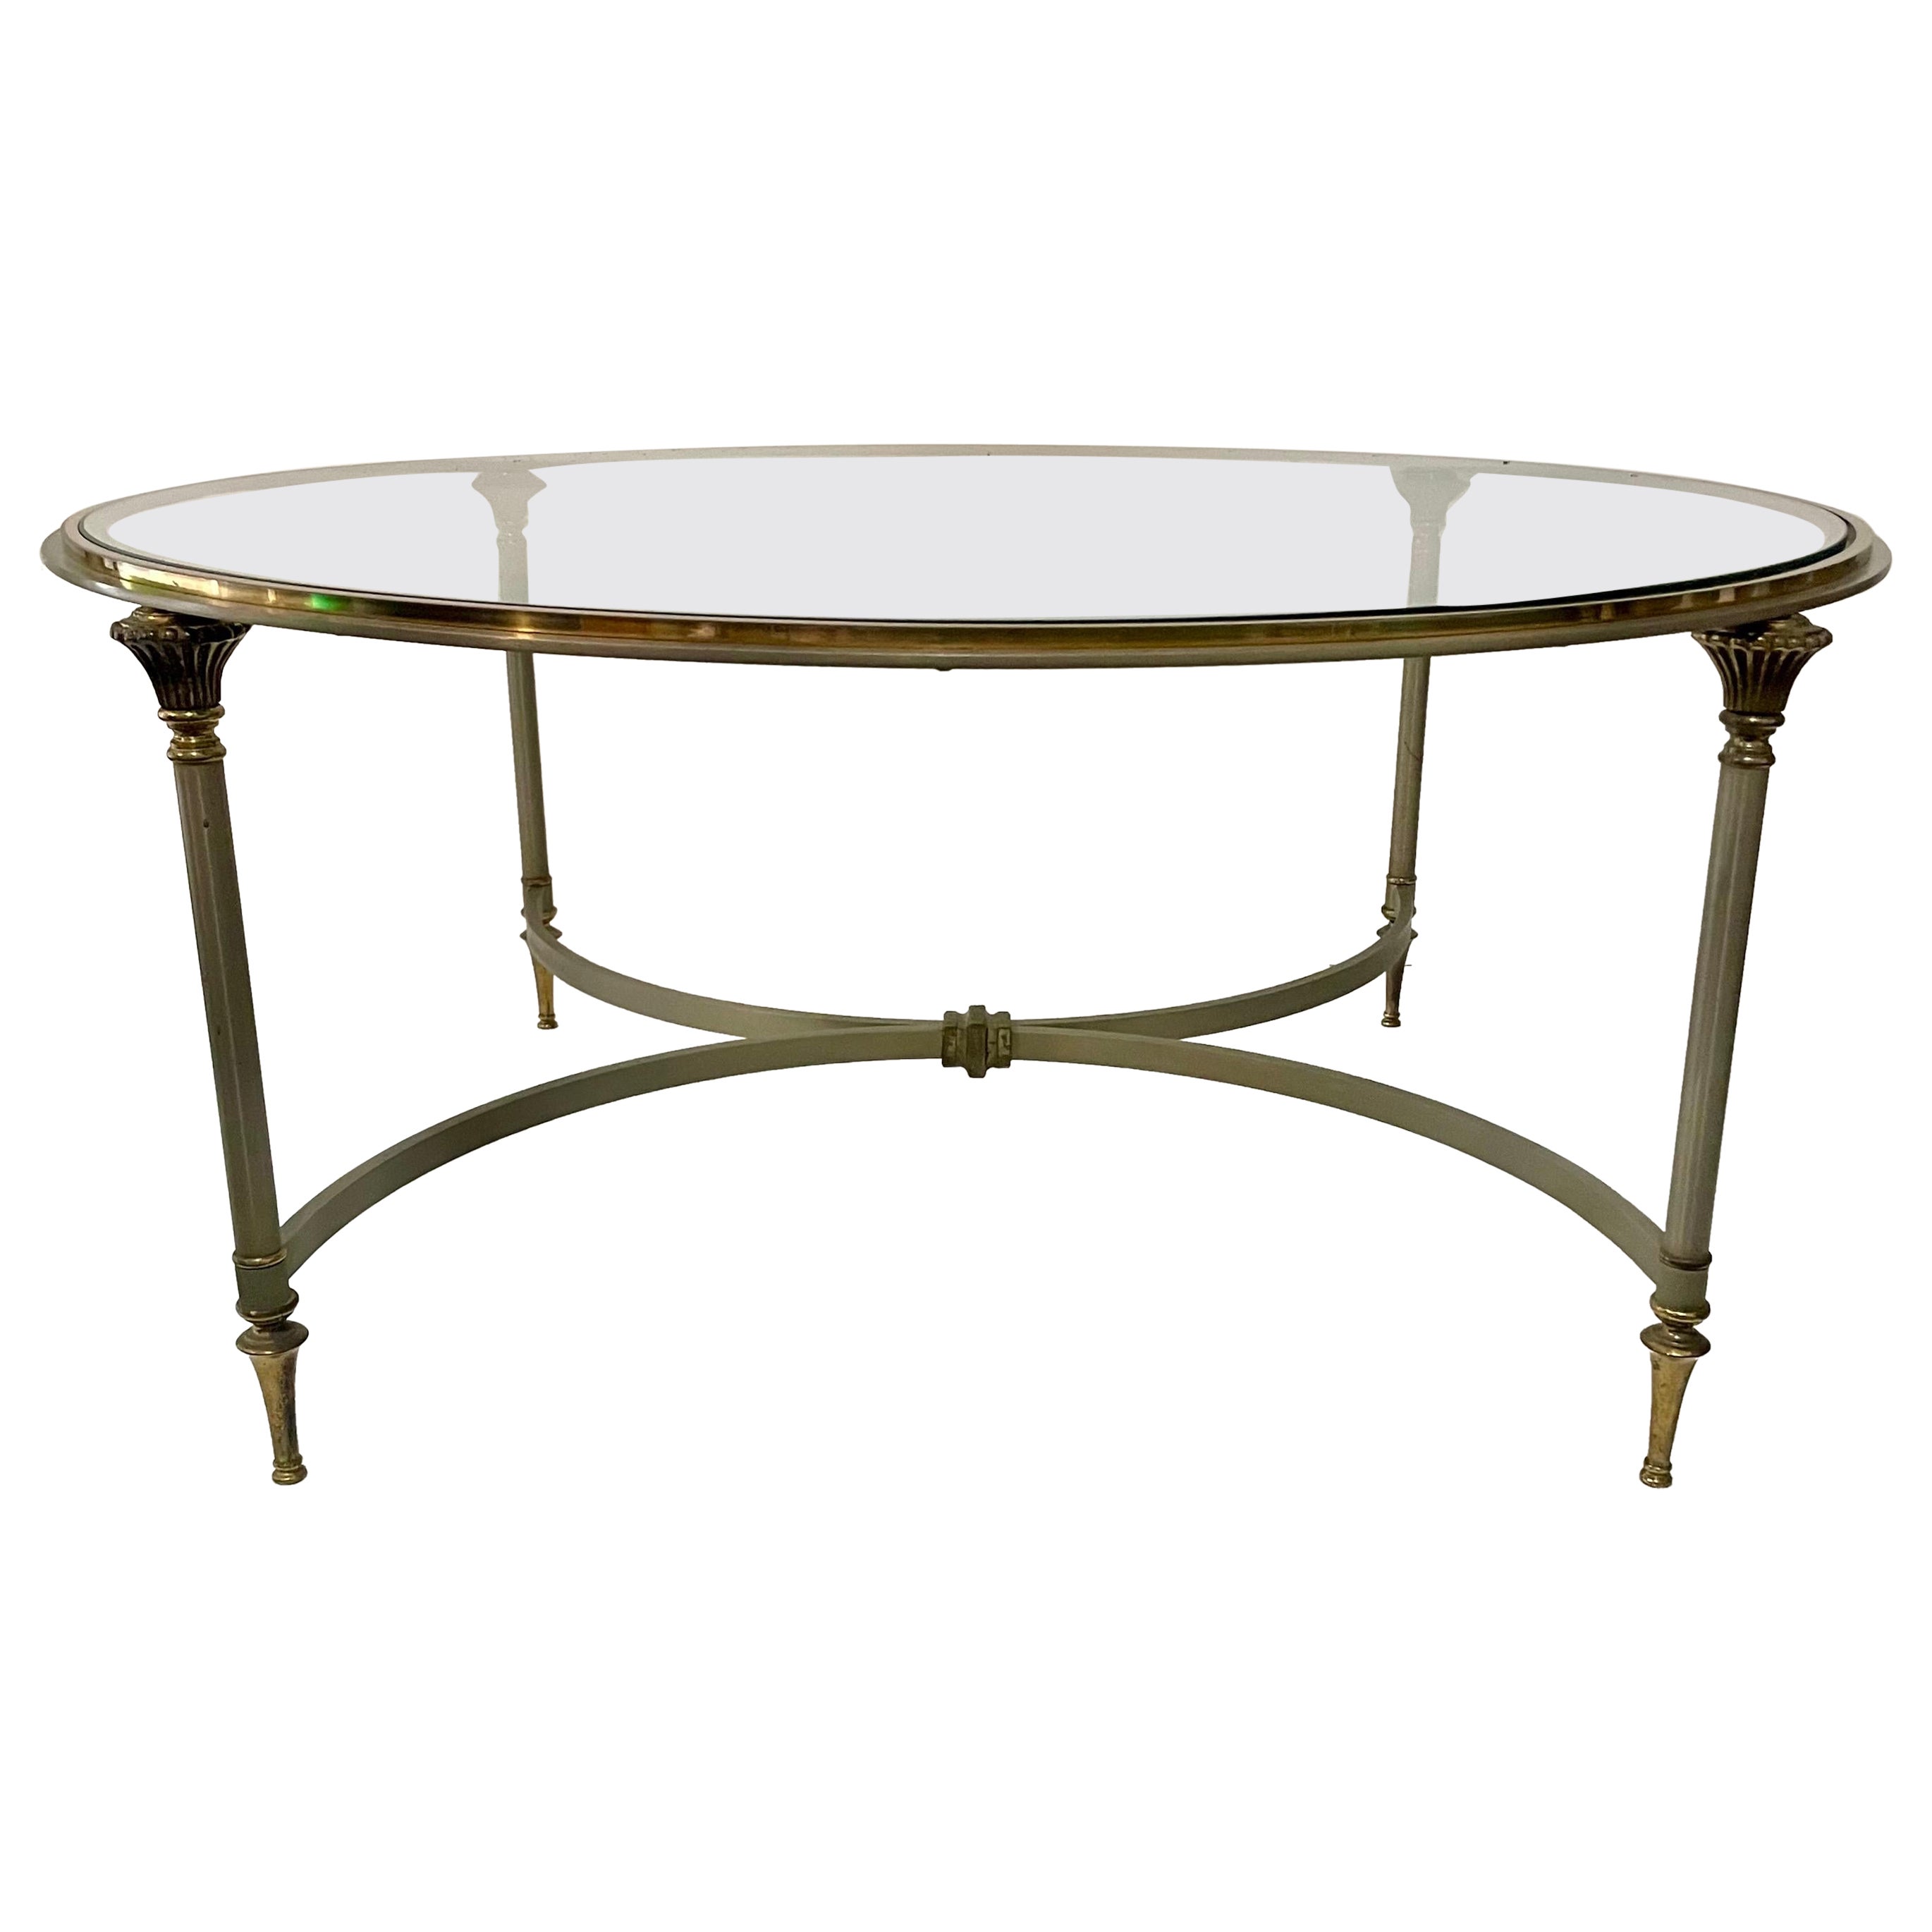  Neoclassical Maison Jansen Style Steel And Brass Coffee Table For Sale